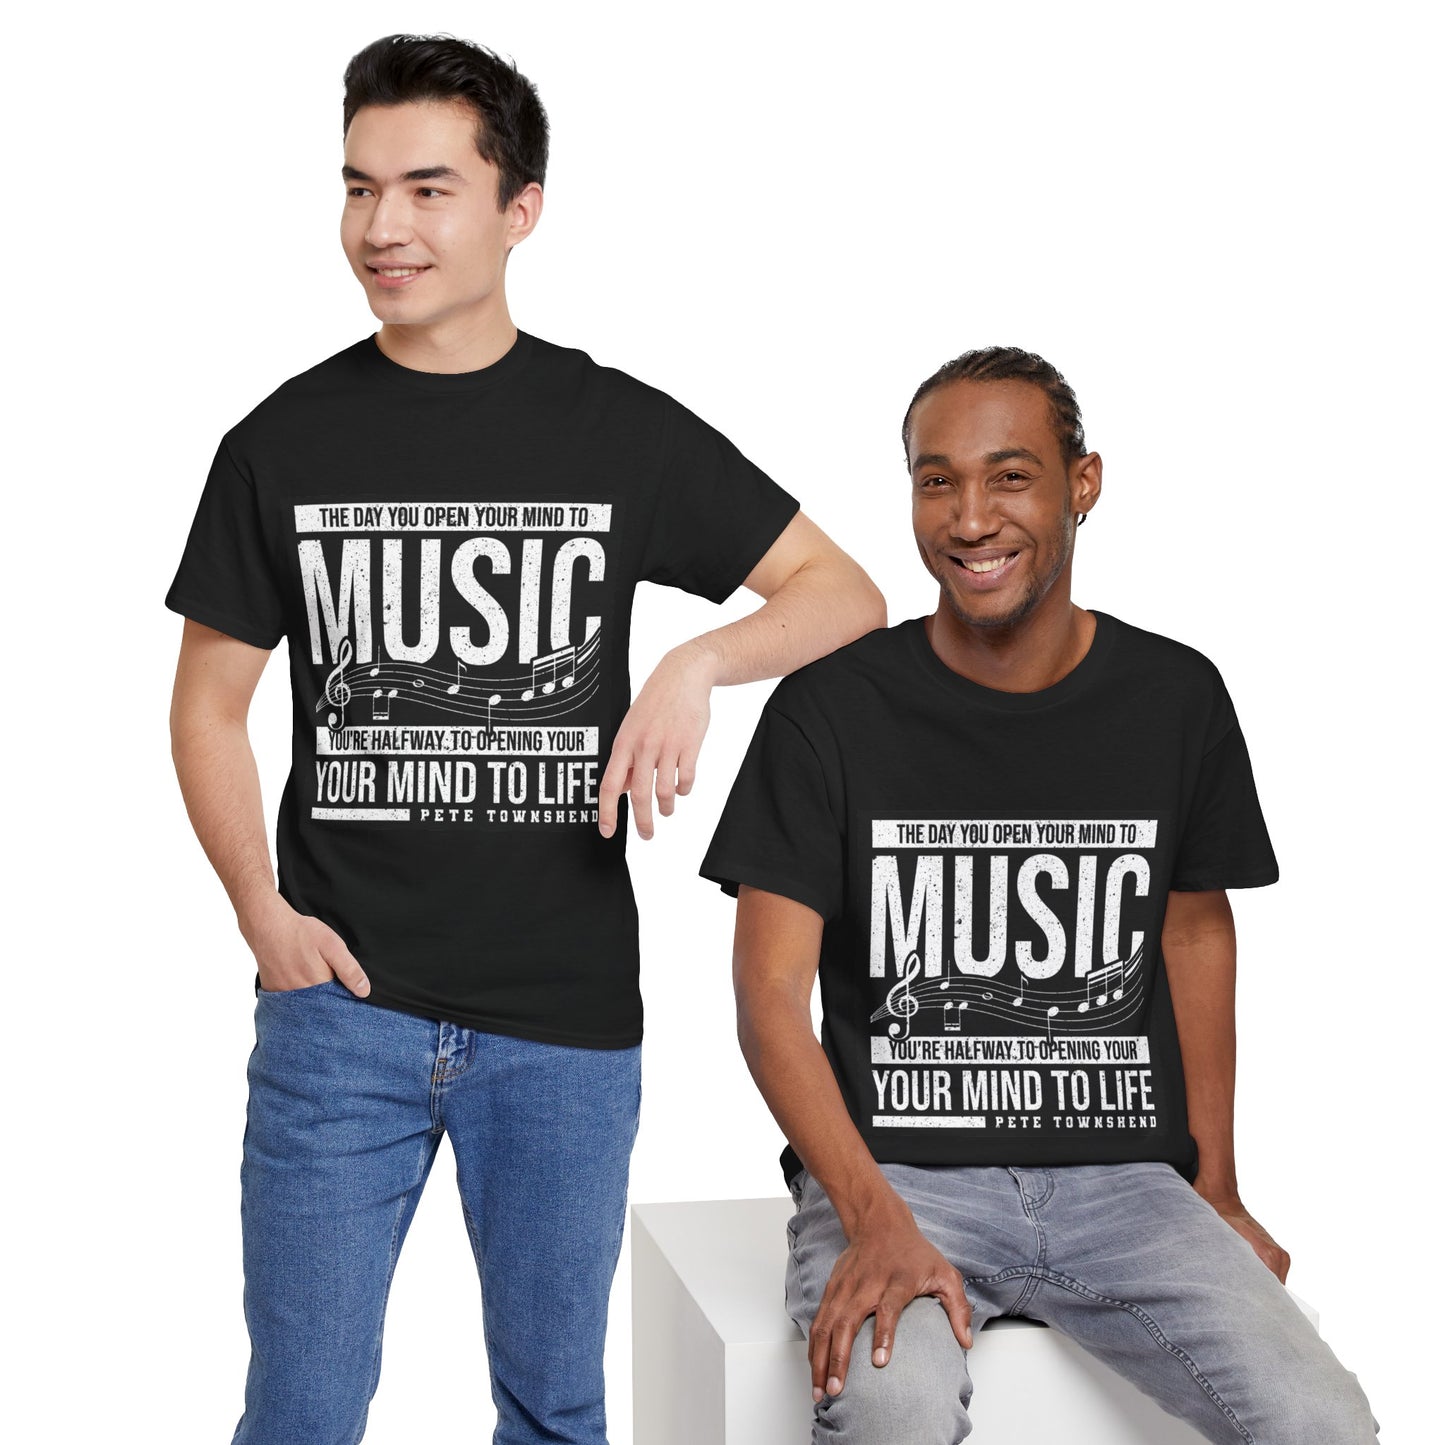 Music: The Language of Connection - Quote Tee The day you open your mind to music